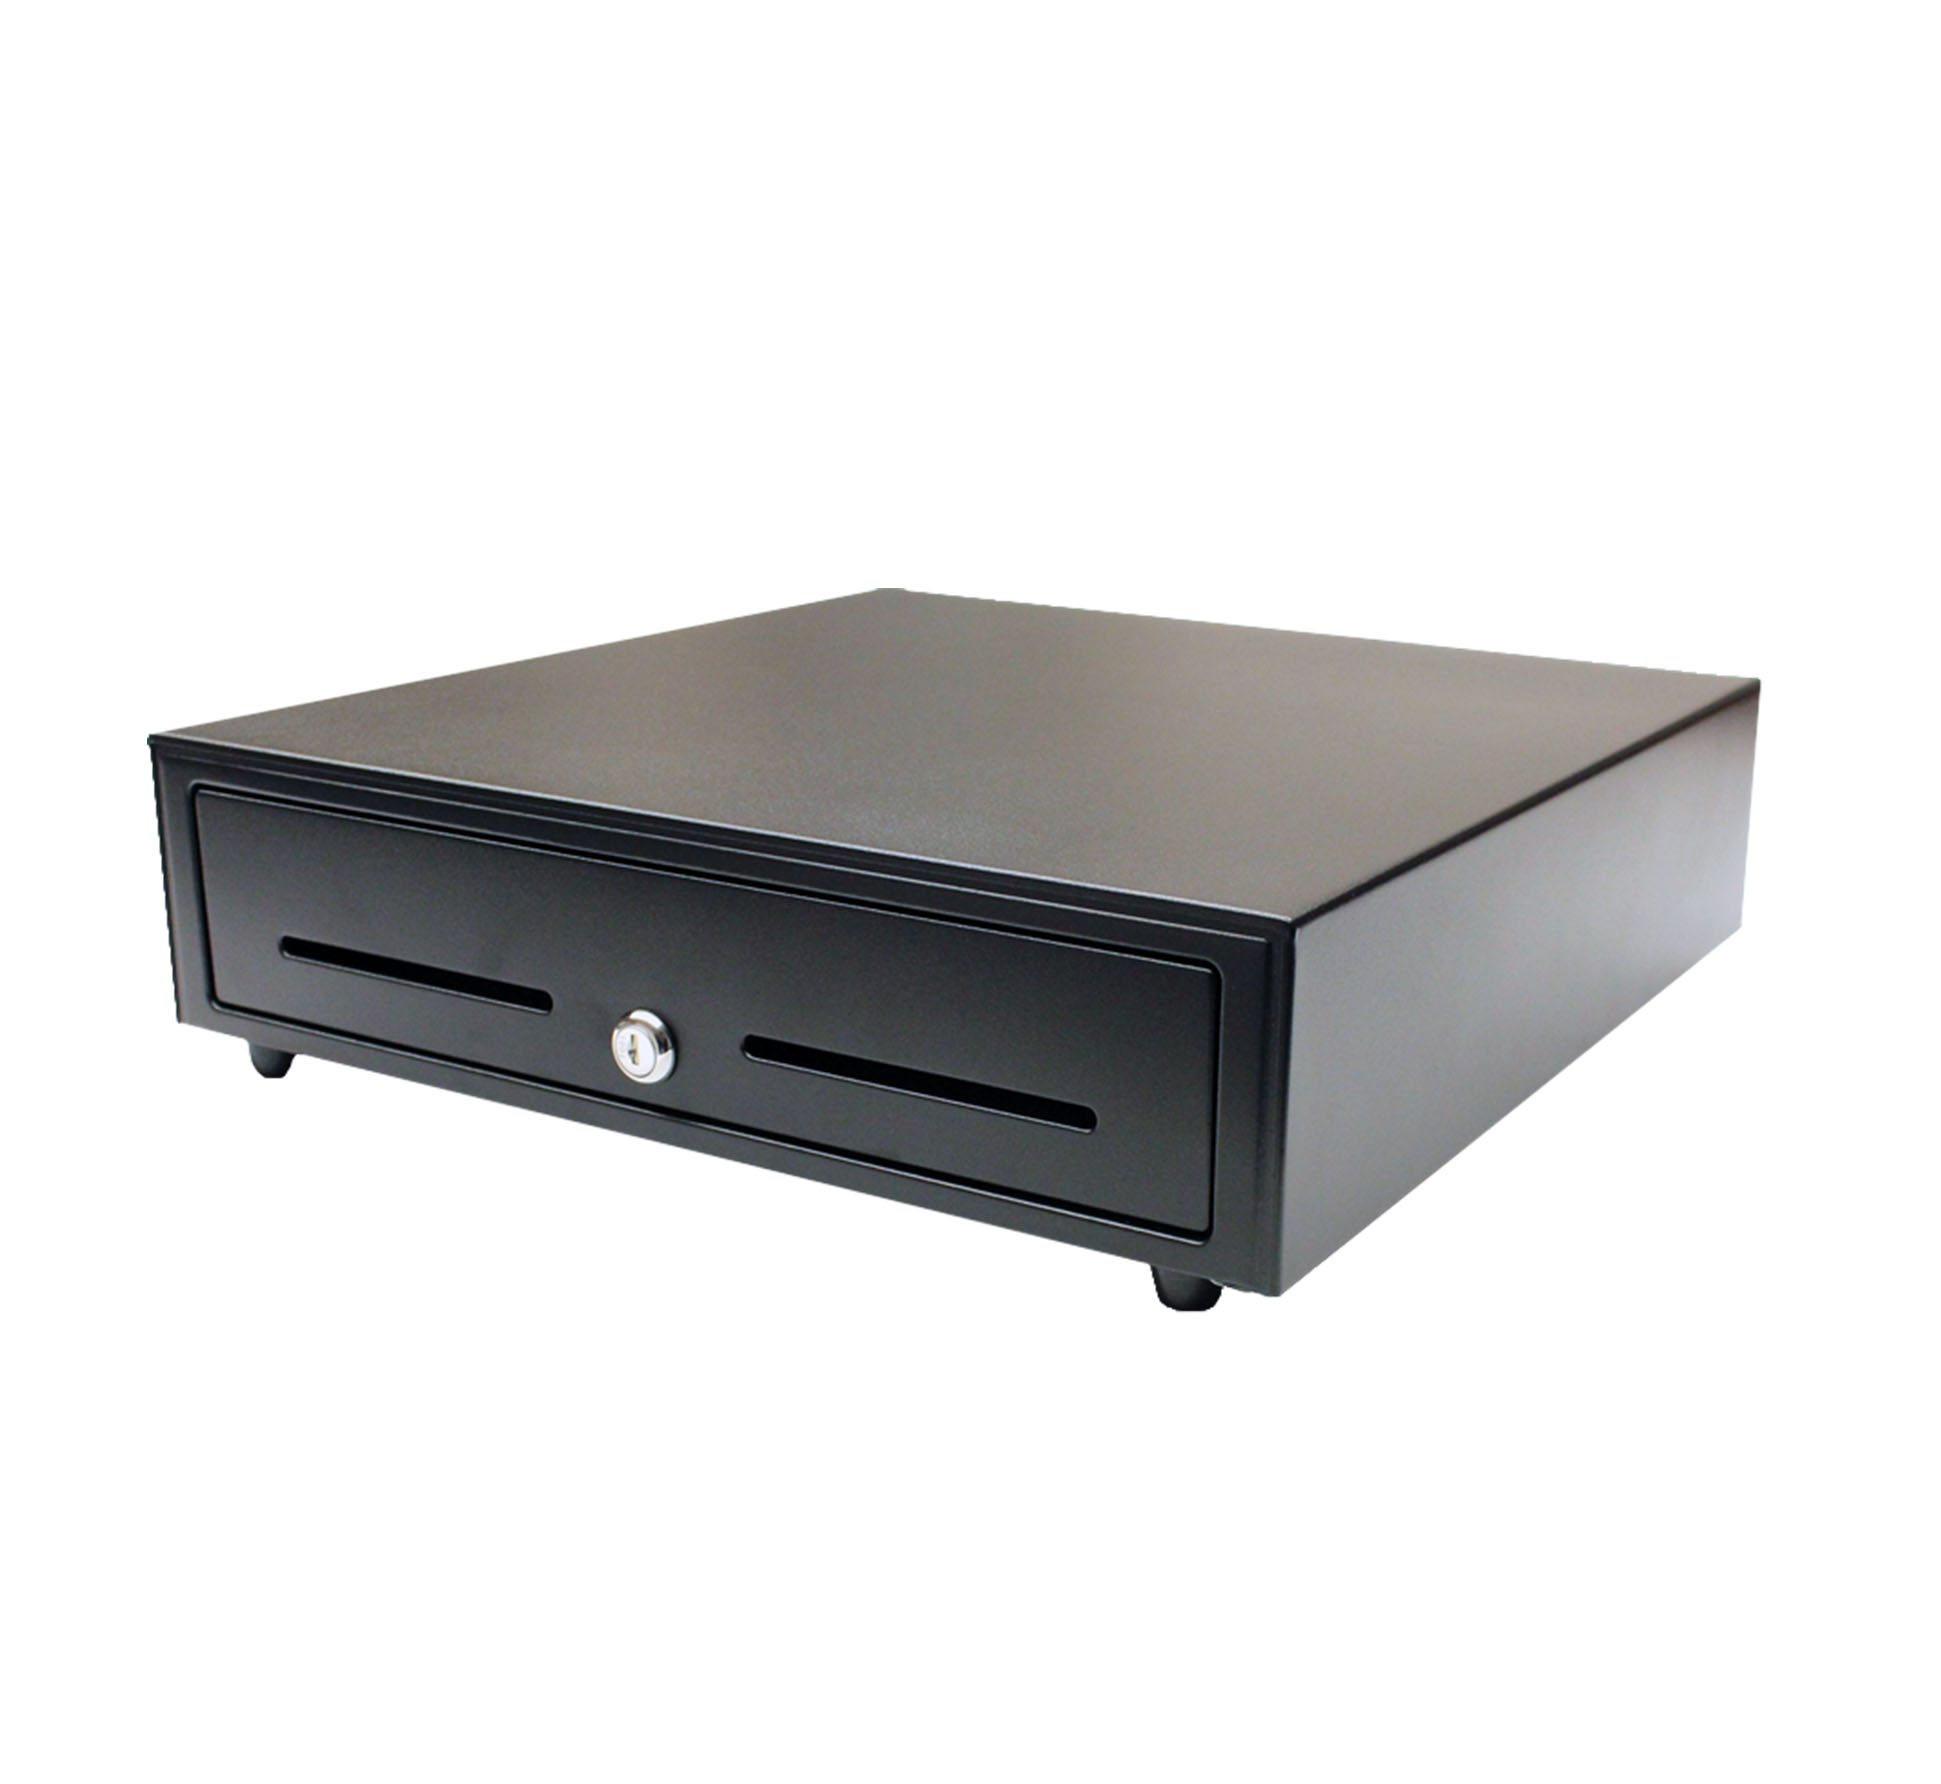 13-in cash drawer angle